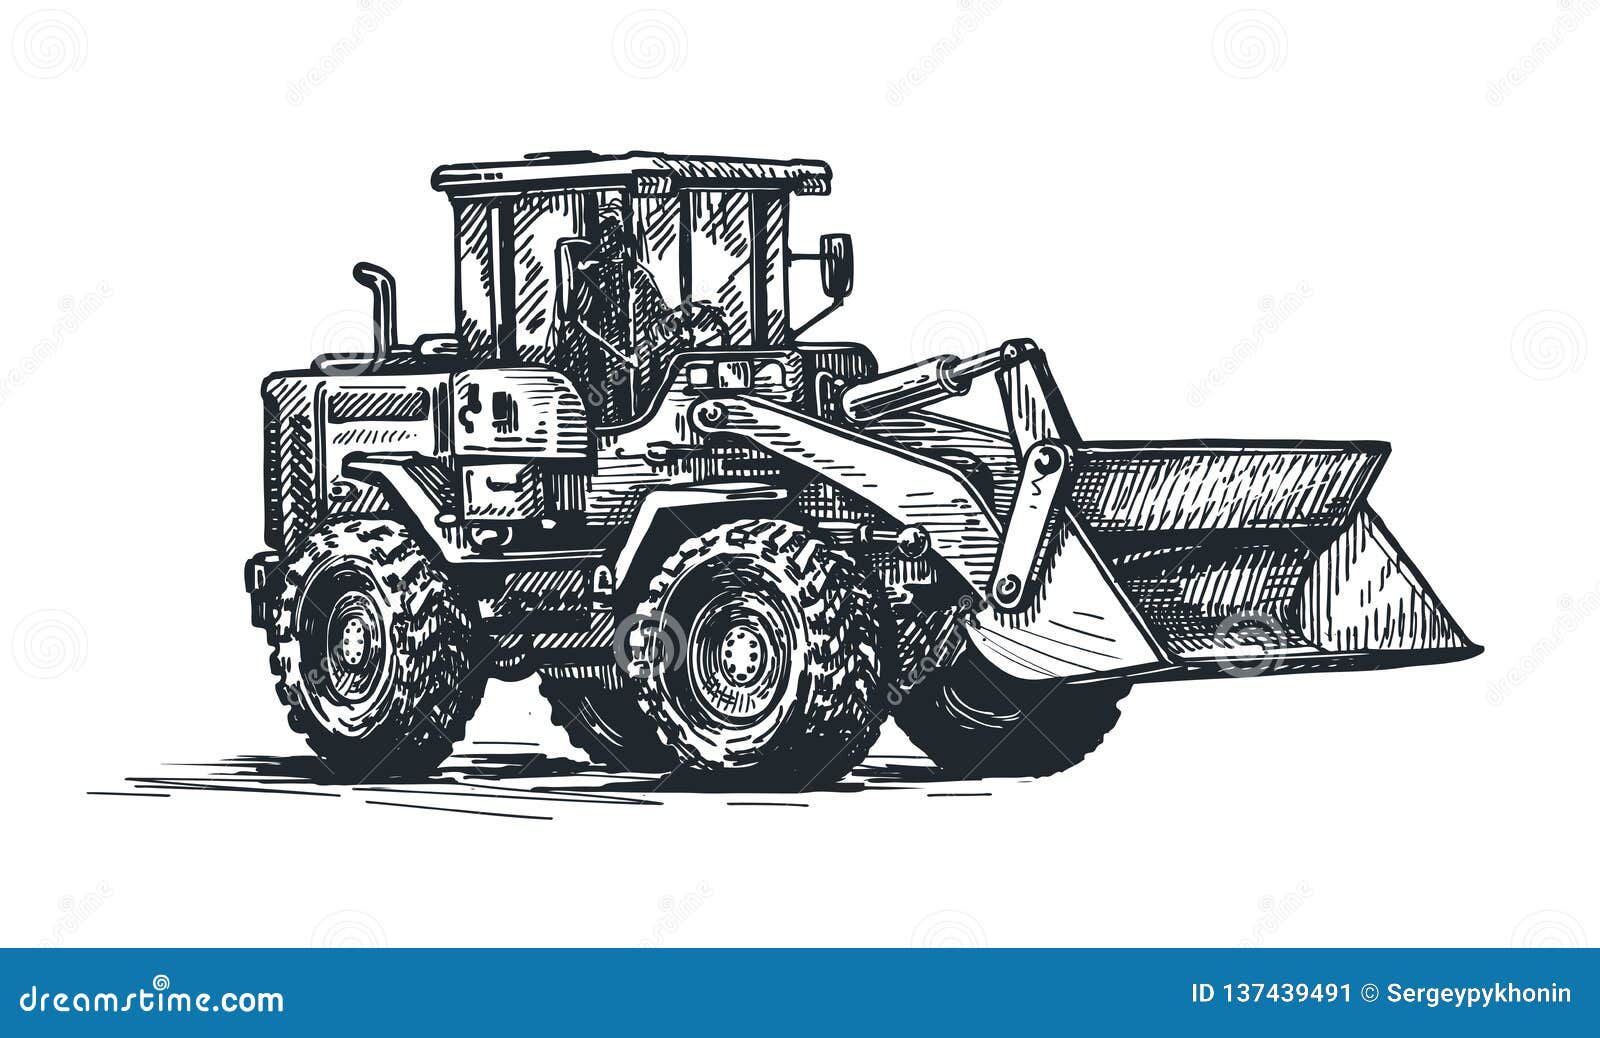 How to draw a bulldozer - YouTube